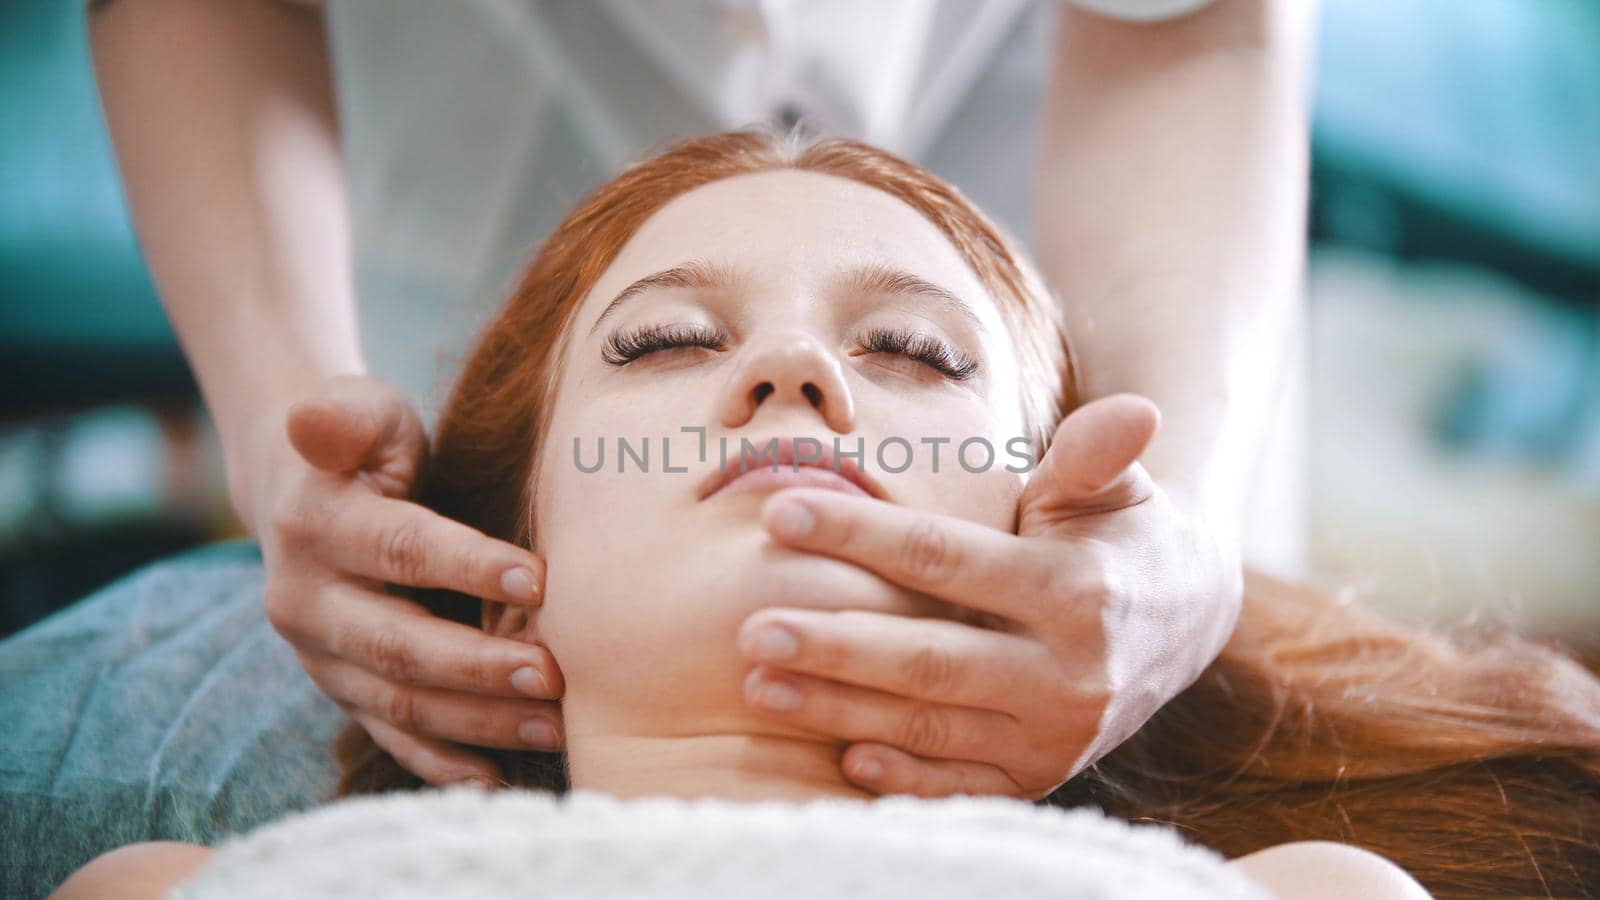 Massage - masseuse kneading the chin area to a young woman using her palms - indoor